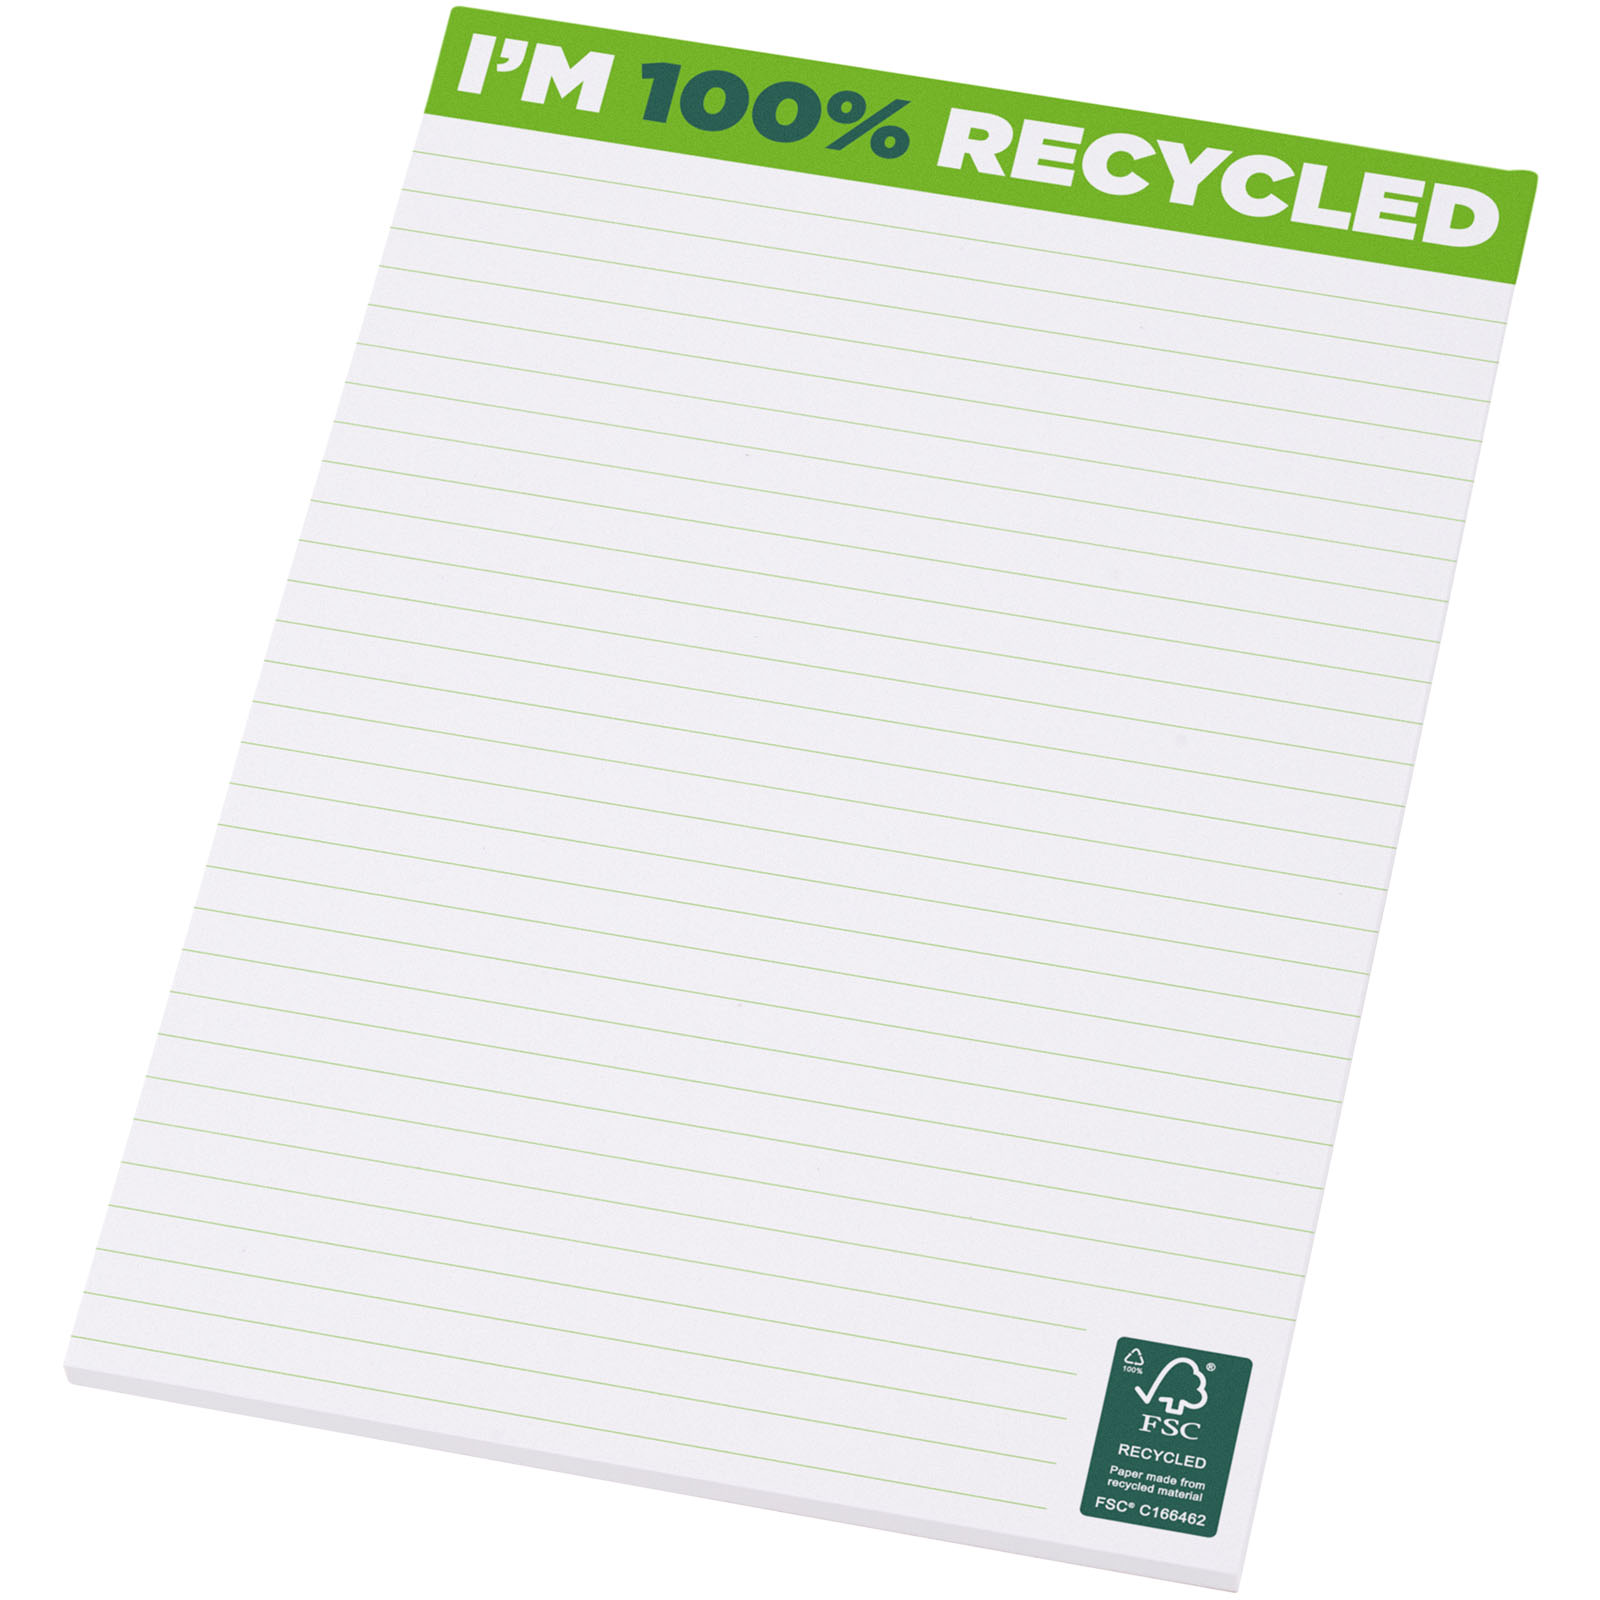 Paper Products - Desk-Mate® A5 recycled notepad